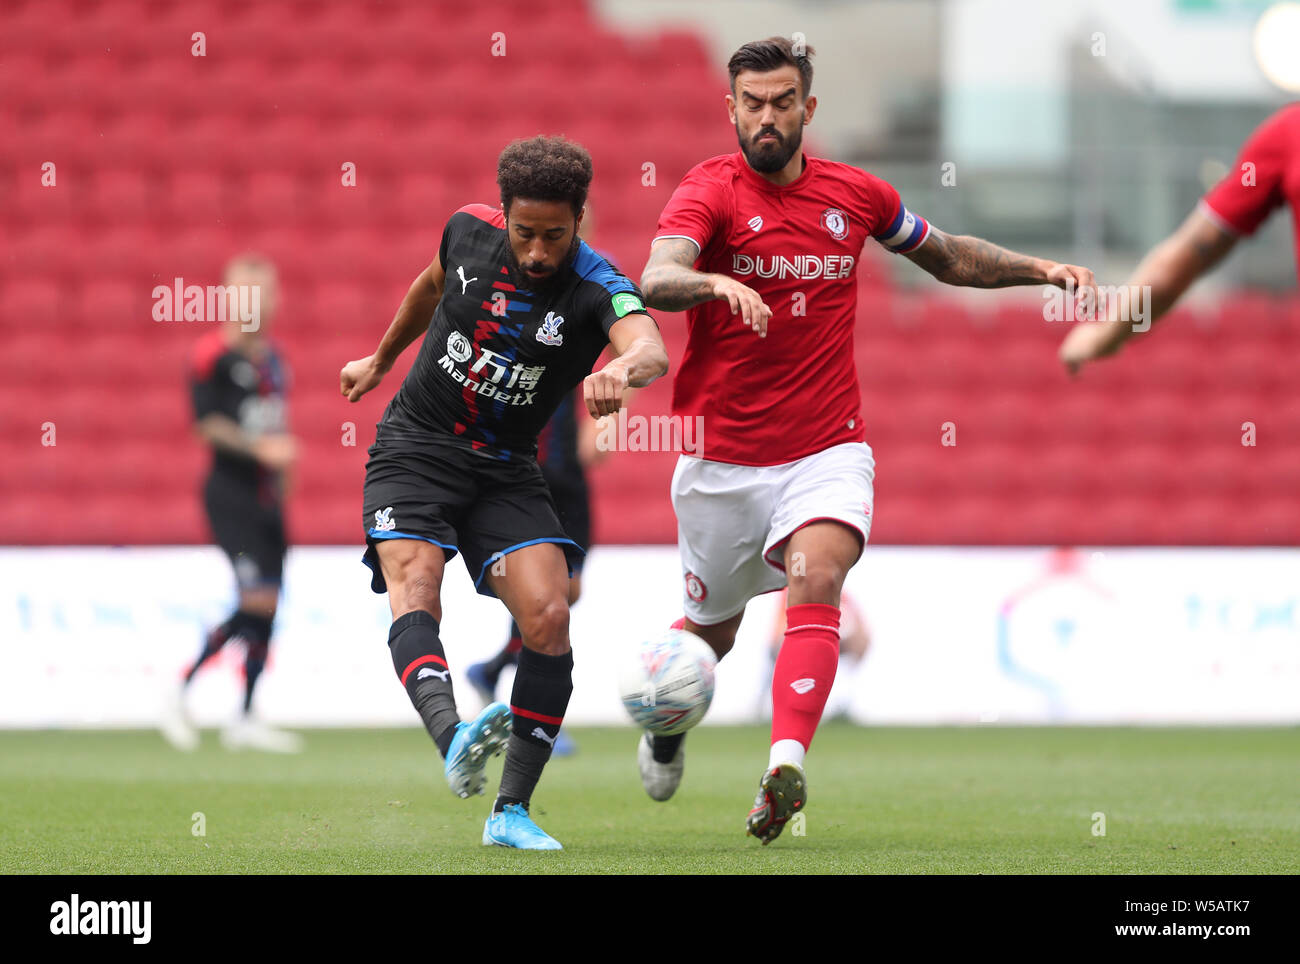 Crystal Palace Andros Townsend is challenged by Bristol City's Marlon Pack during the pre-season friendly match at Ashton Gate, Bristol. Stock Photo